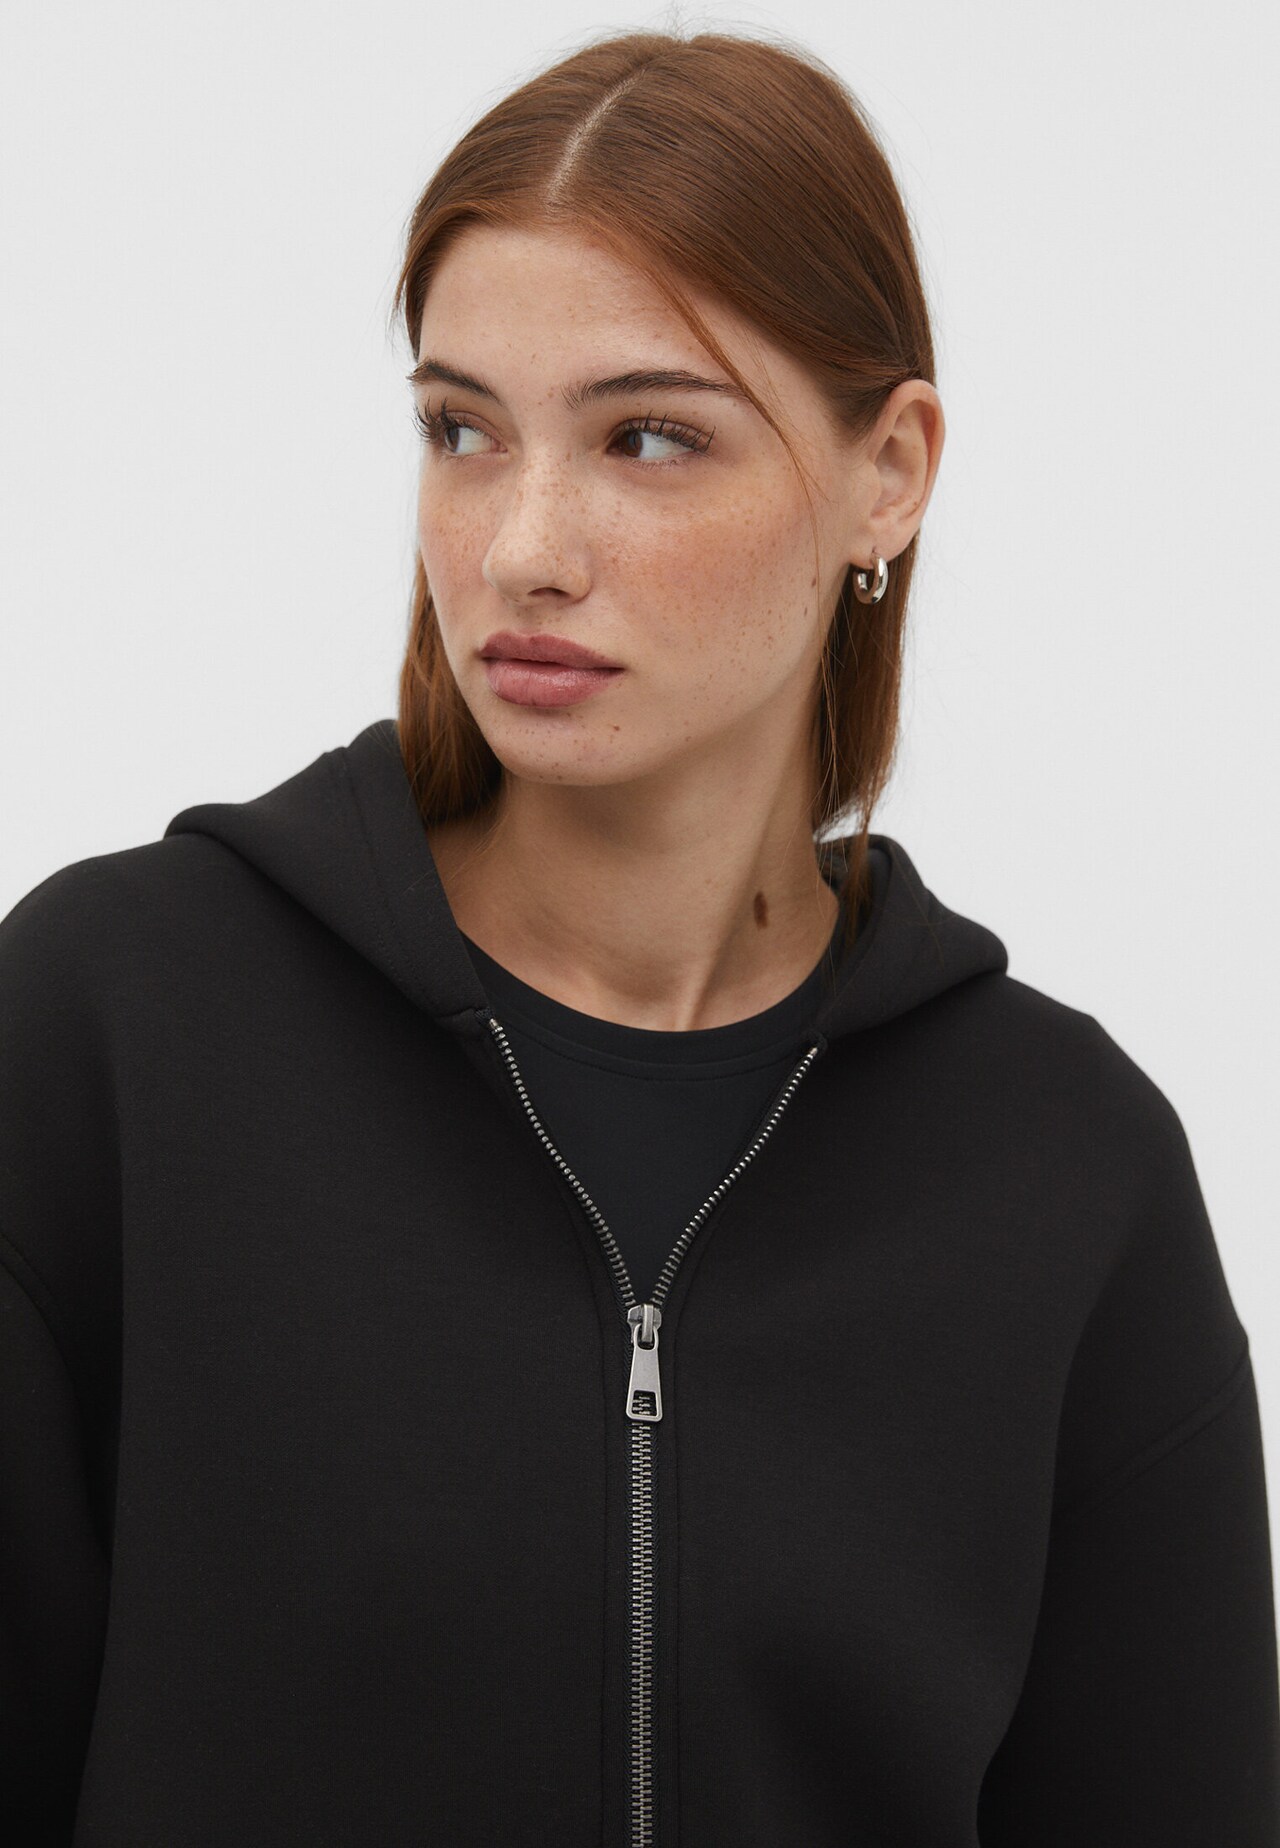 The Pretty Hoodie Trend H&M Just Started